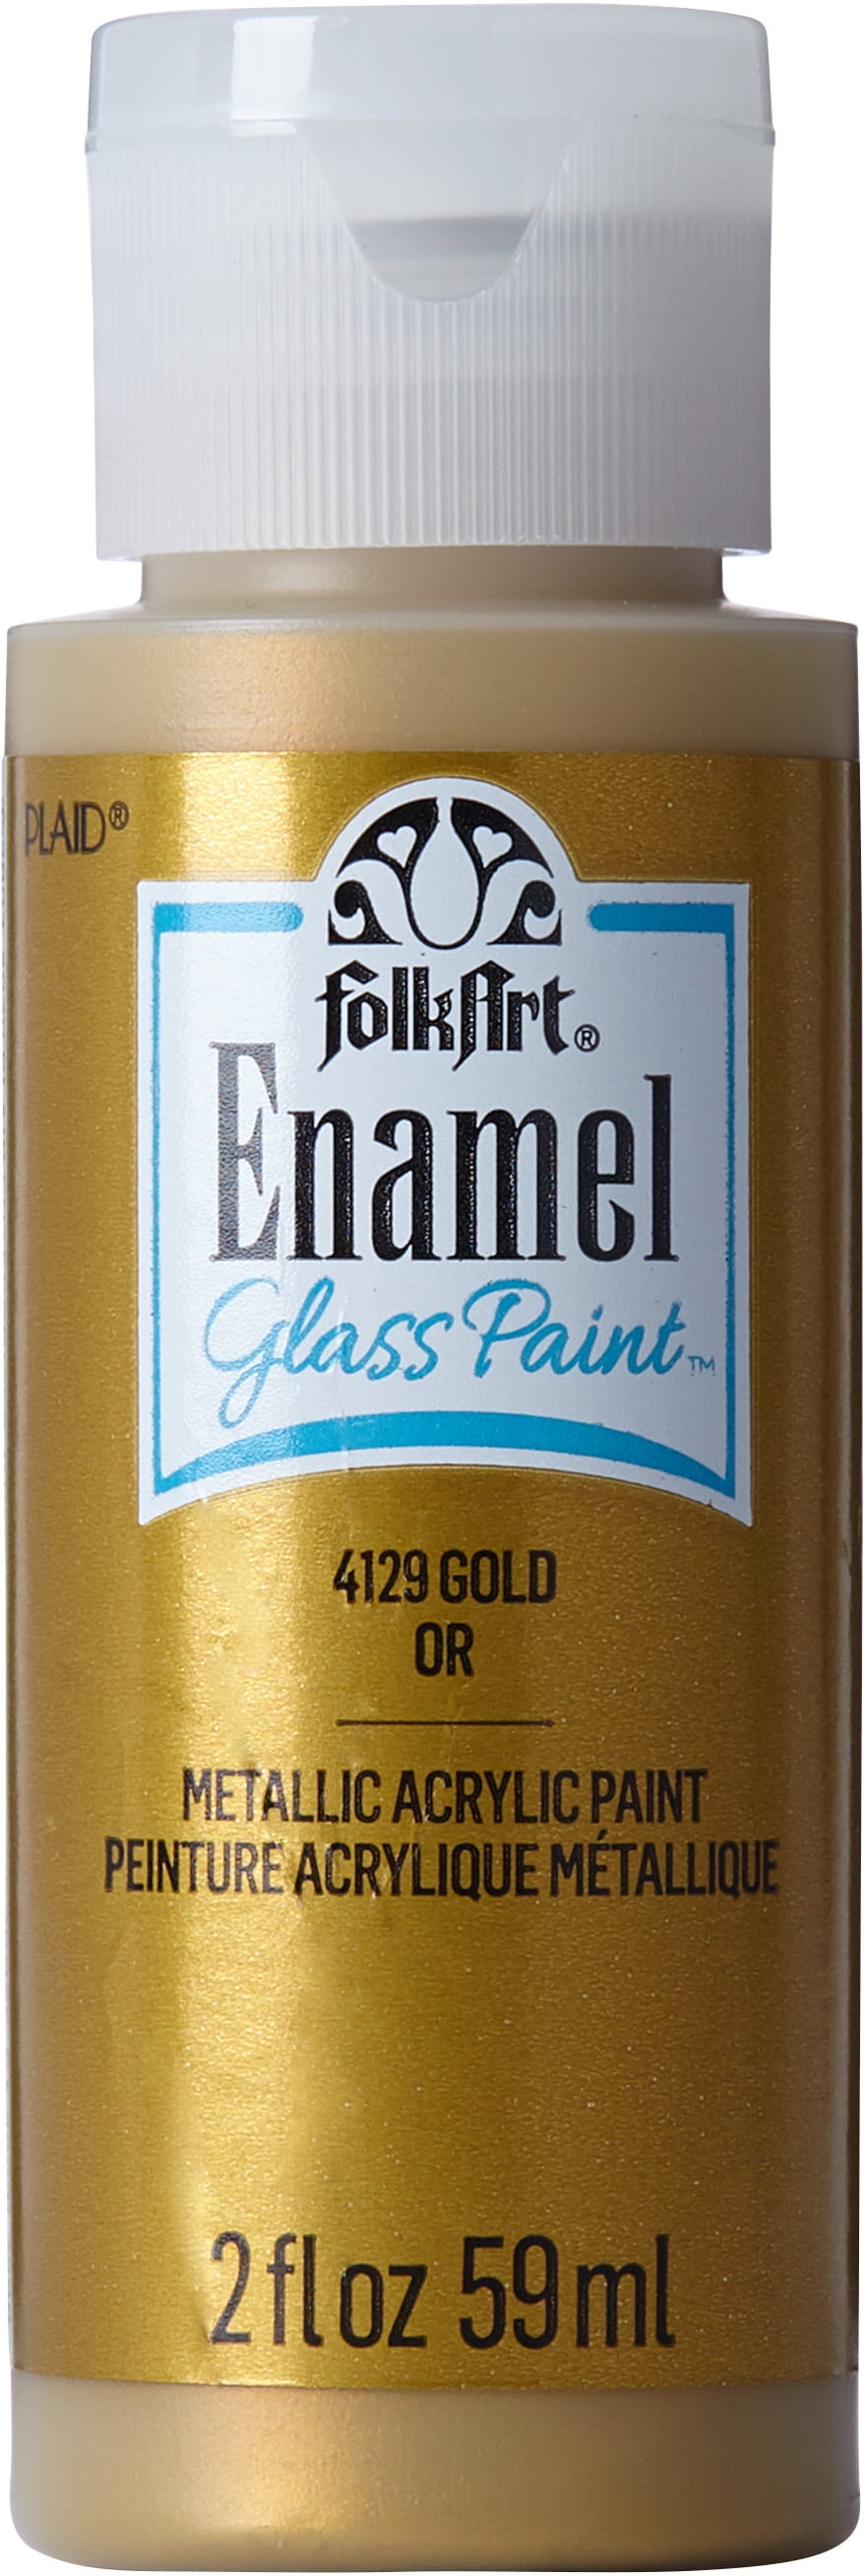 FolkArt Enamel Acrylic Craft Paint, Classic Mint Green 2 fl oz Premium  Matte Finish Paint, Perfect For Easy To Apply DIY Arts And Crafts, 11952